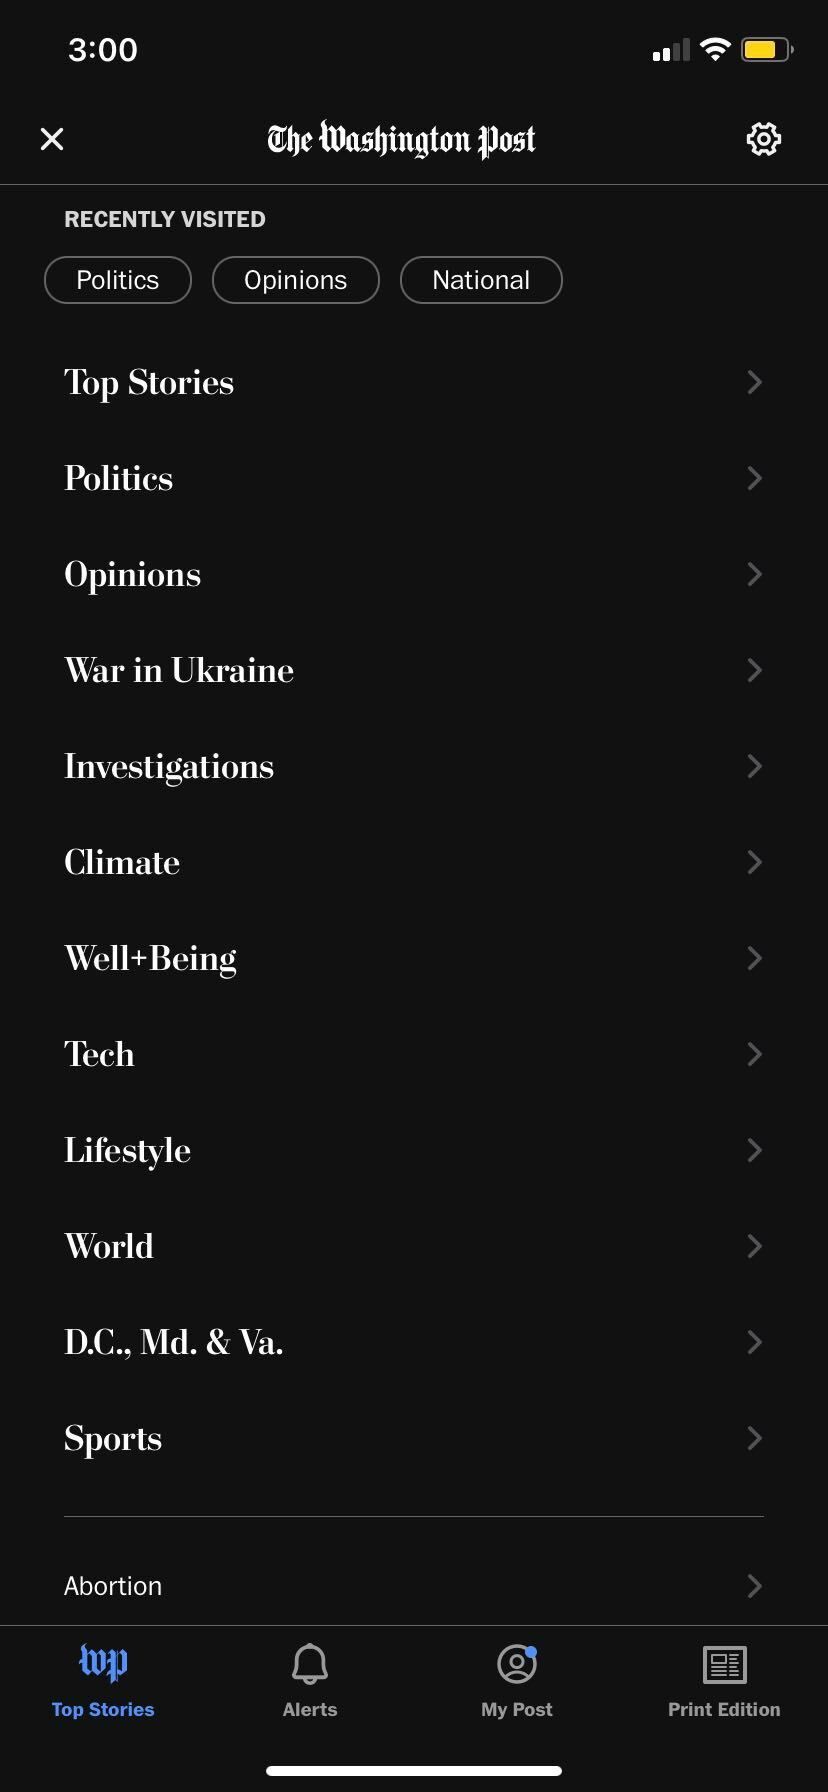 ​​Screenshot of the Washington Post mobile app shows the Top Stories tab contents. The settings menu gear icon is visible in the top right corner of the screen.